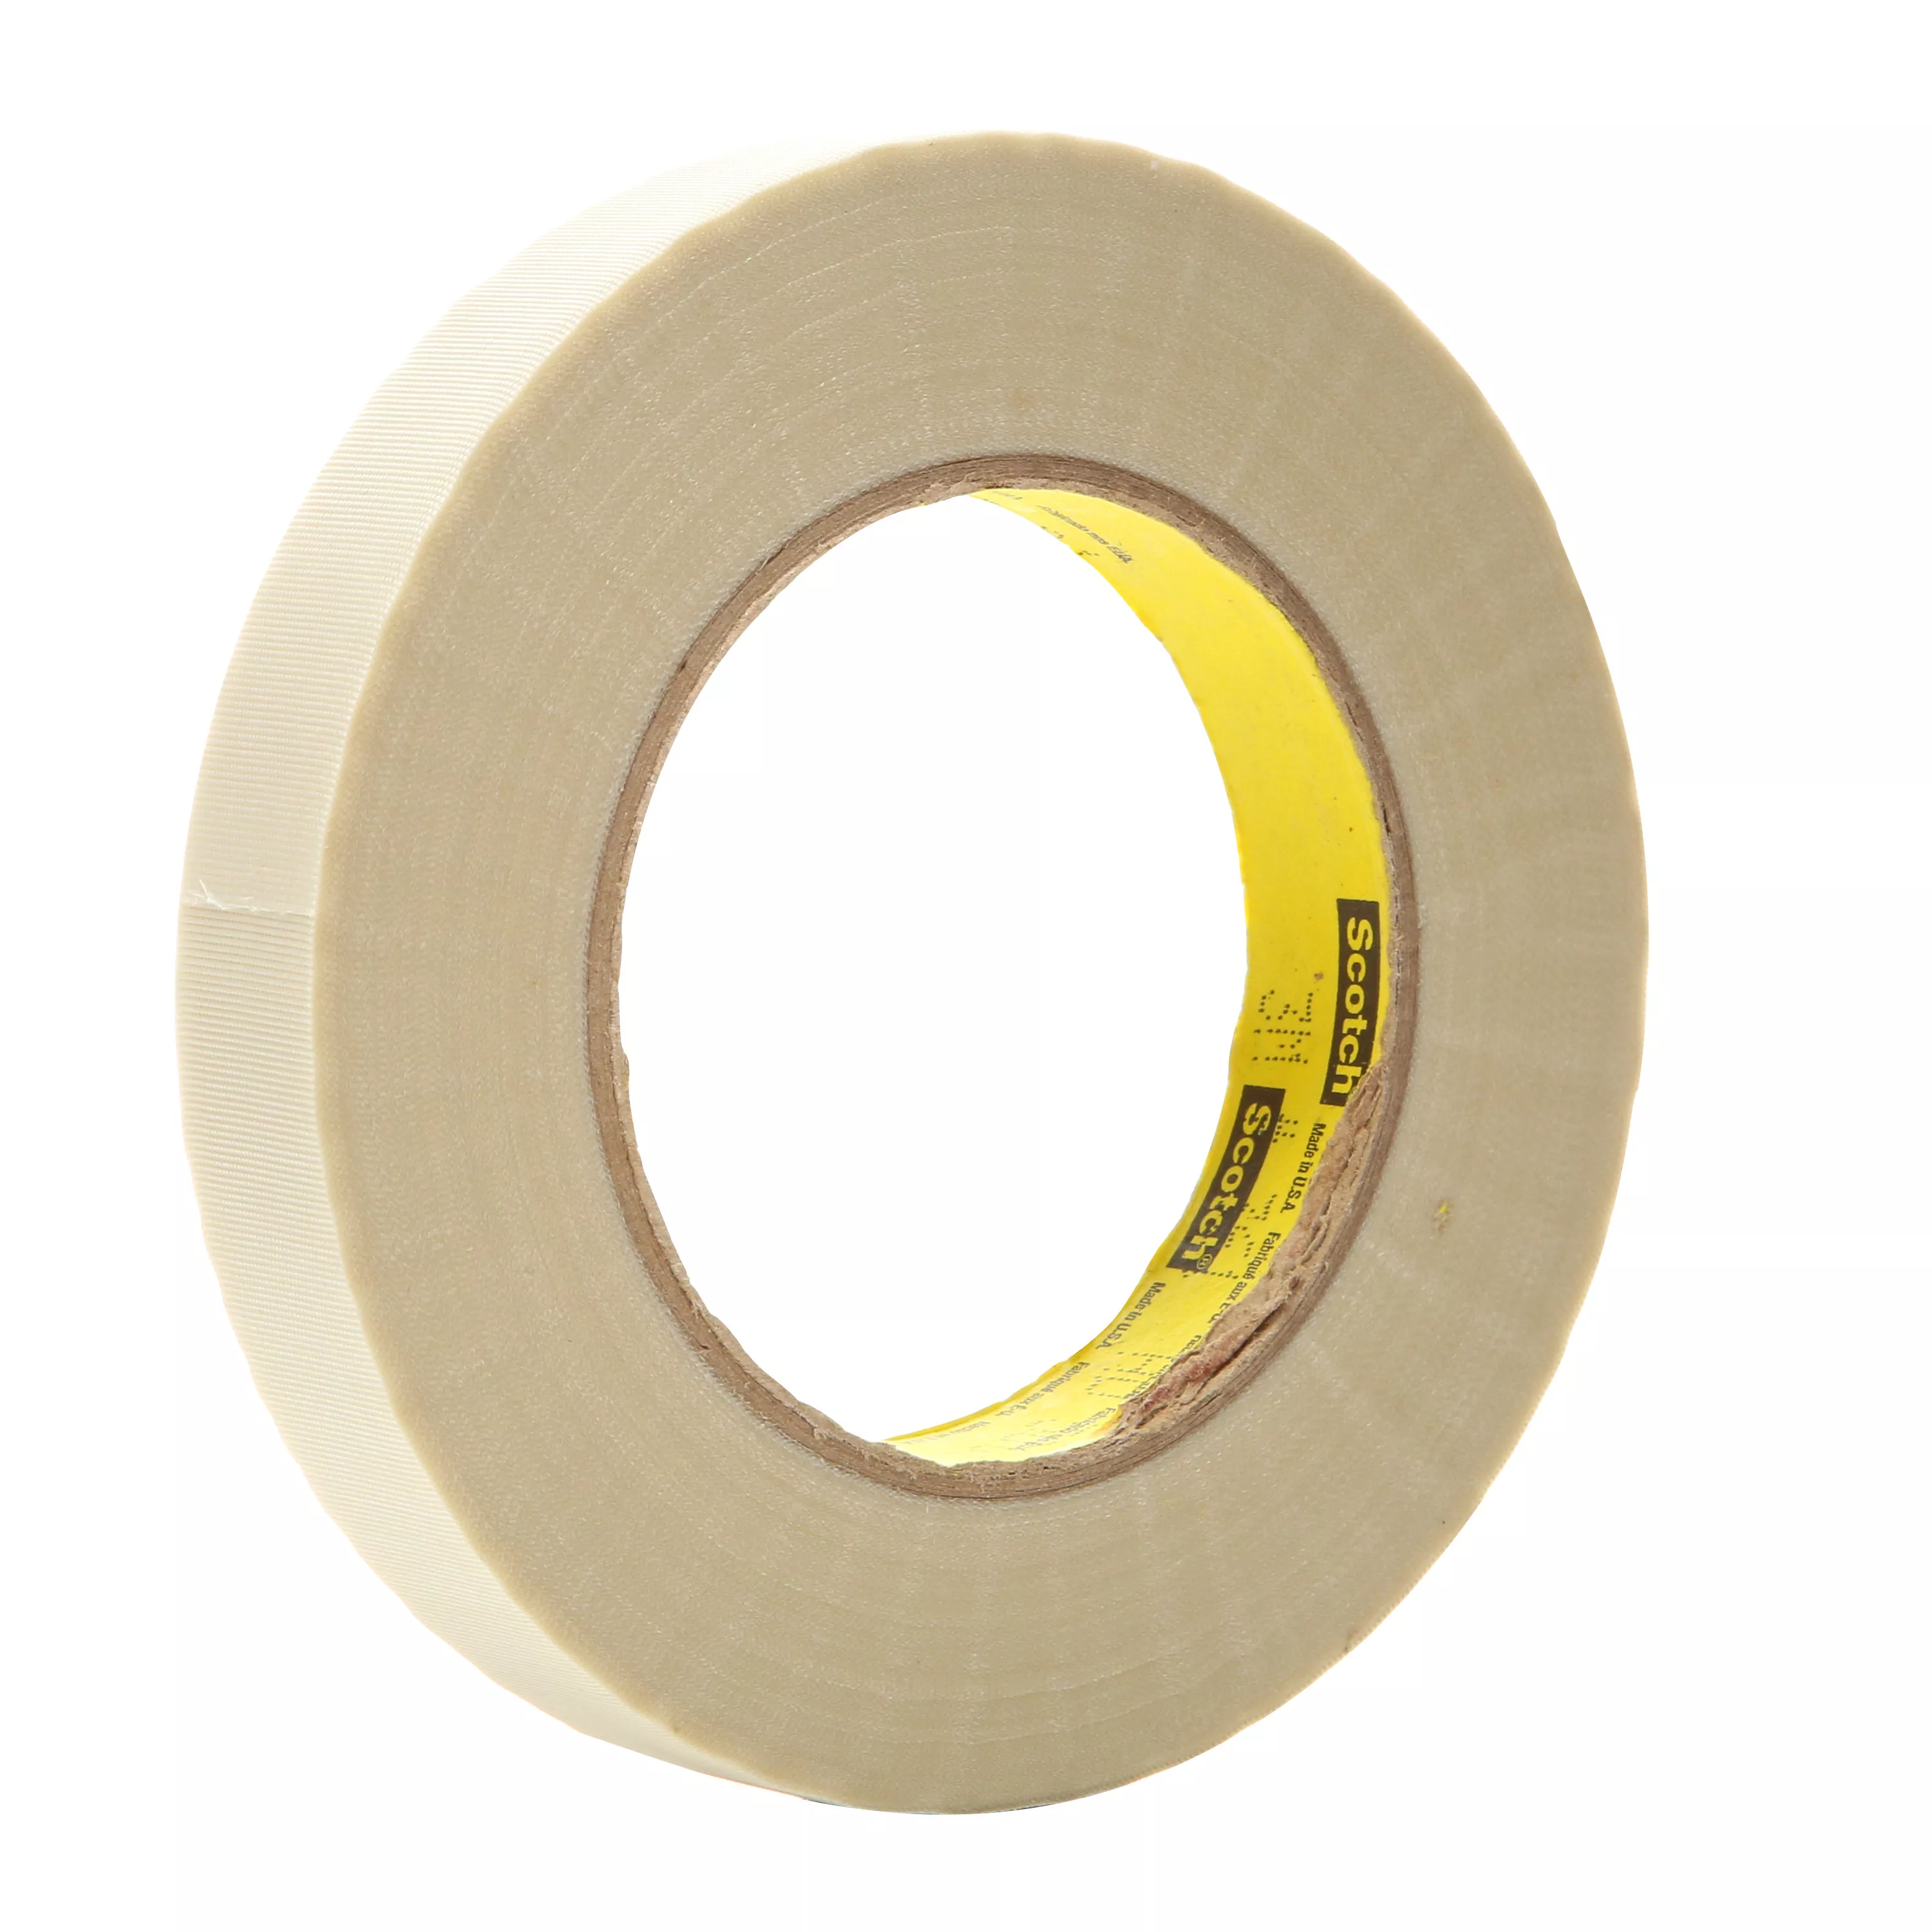 3M™ Glass Cloth Tape 361, White, 3/4 in x 60 yd, 6.4 mil, 48 Roll/Case